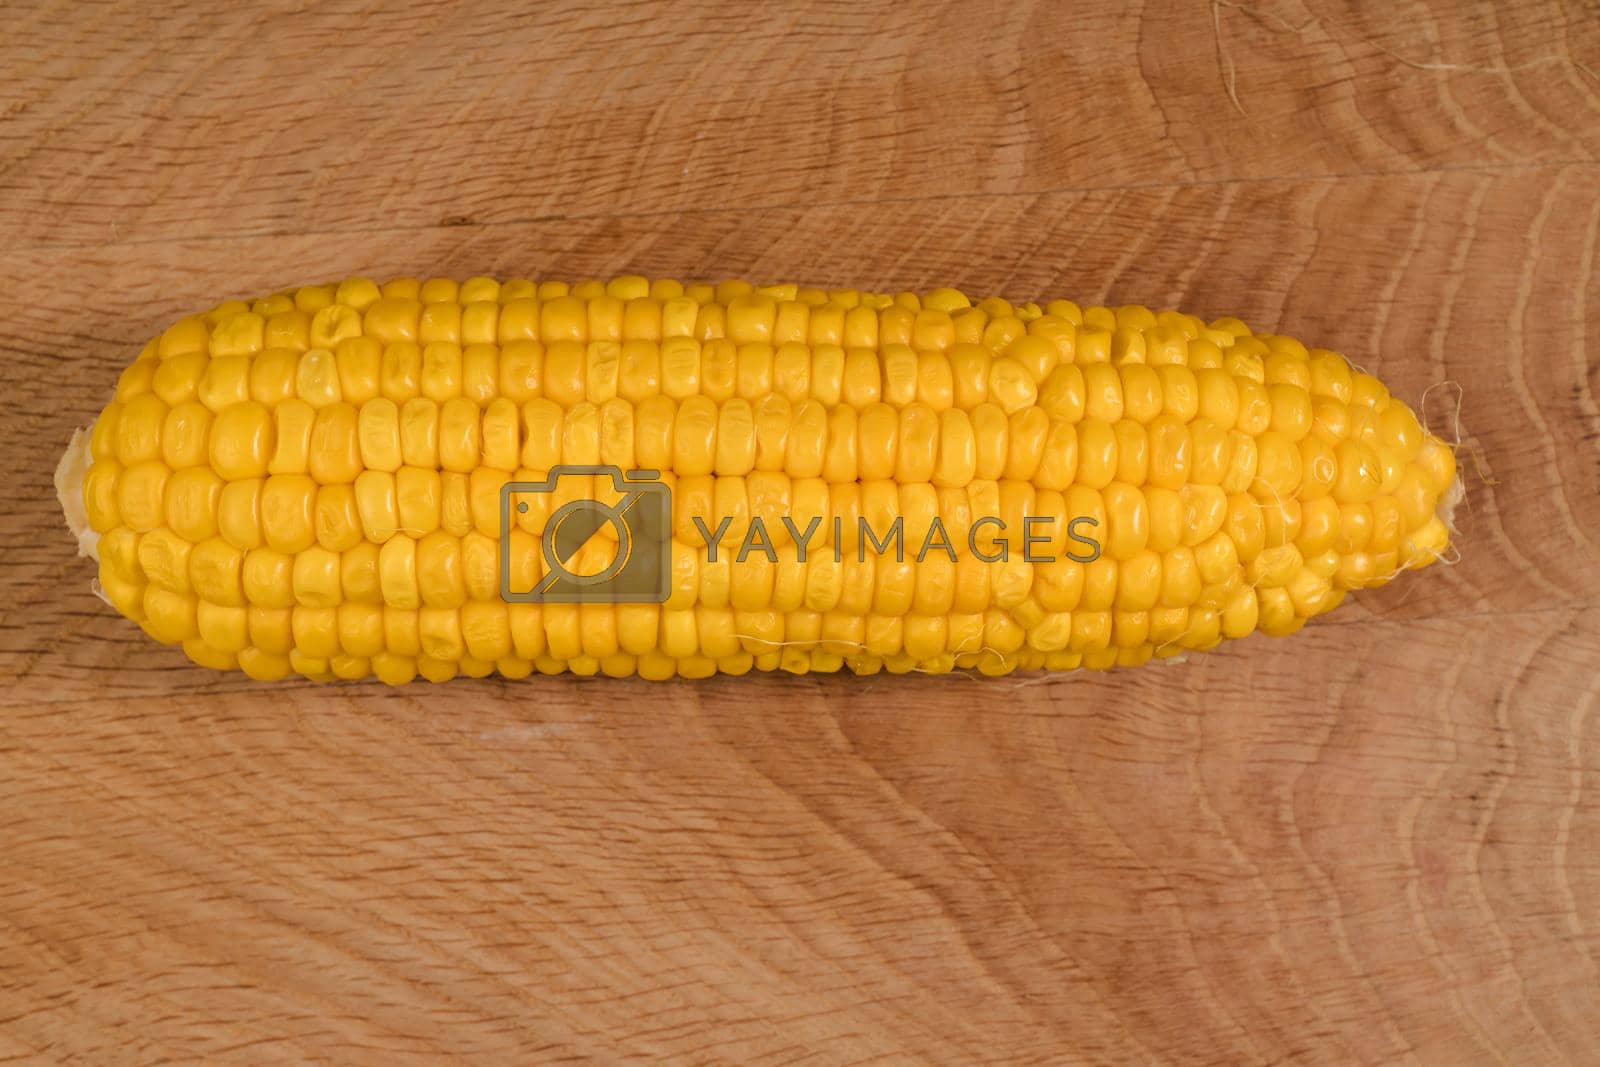 Royalty free image of Ripe corn in a roach, peeled from husk, on a wooden board by A_A